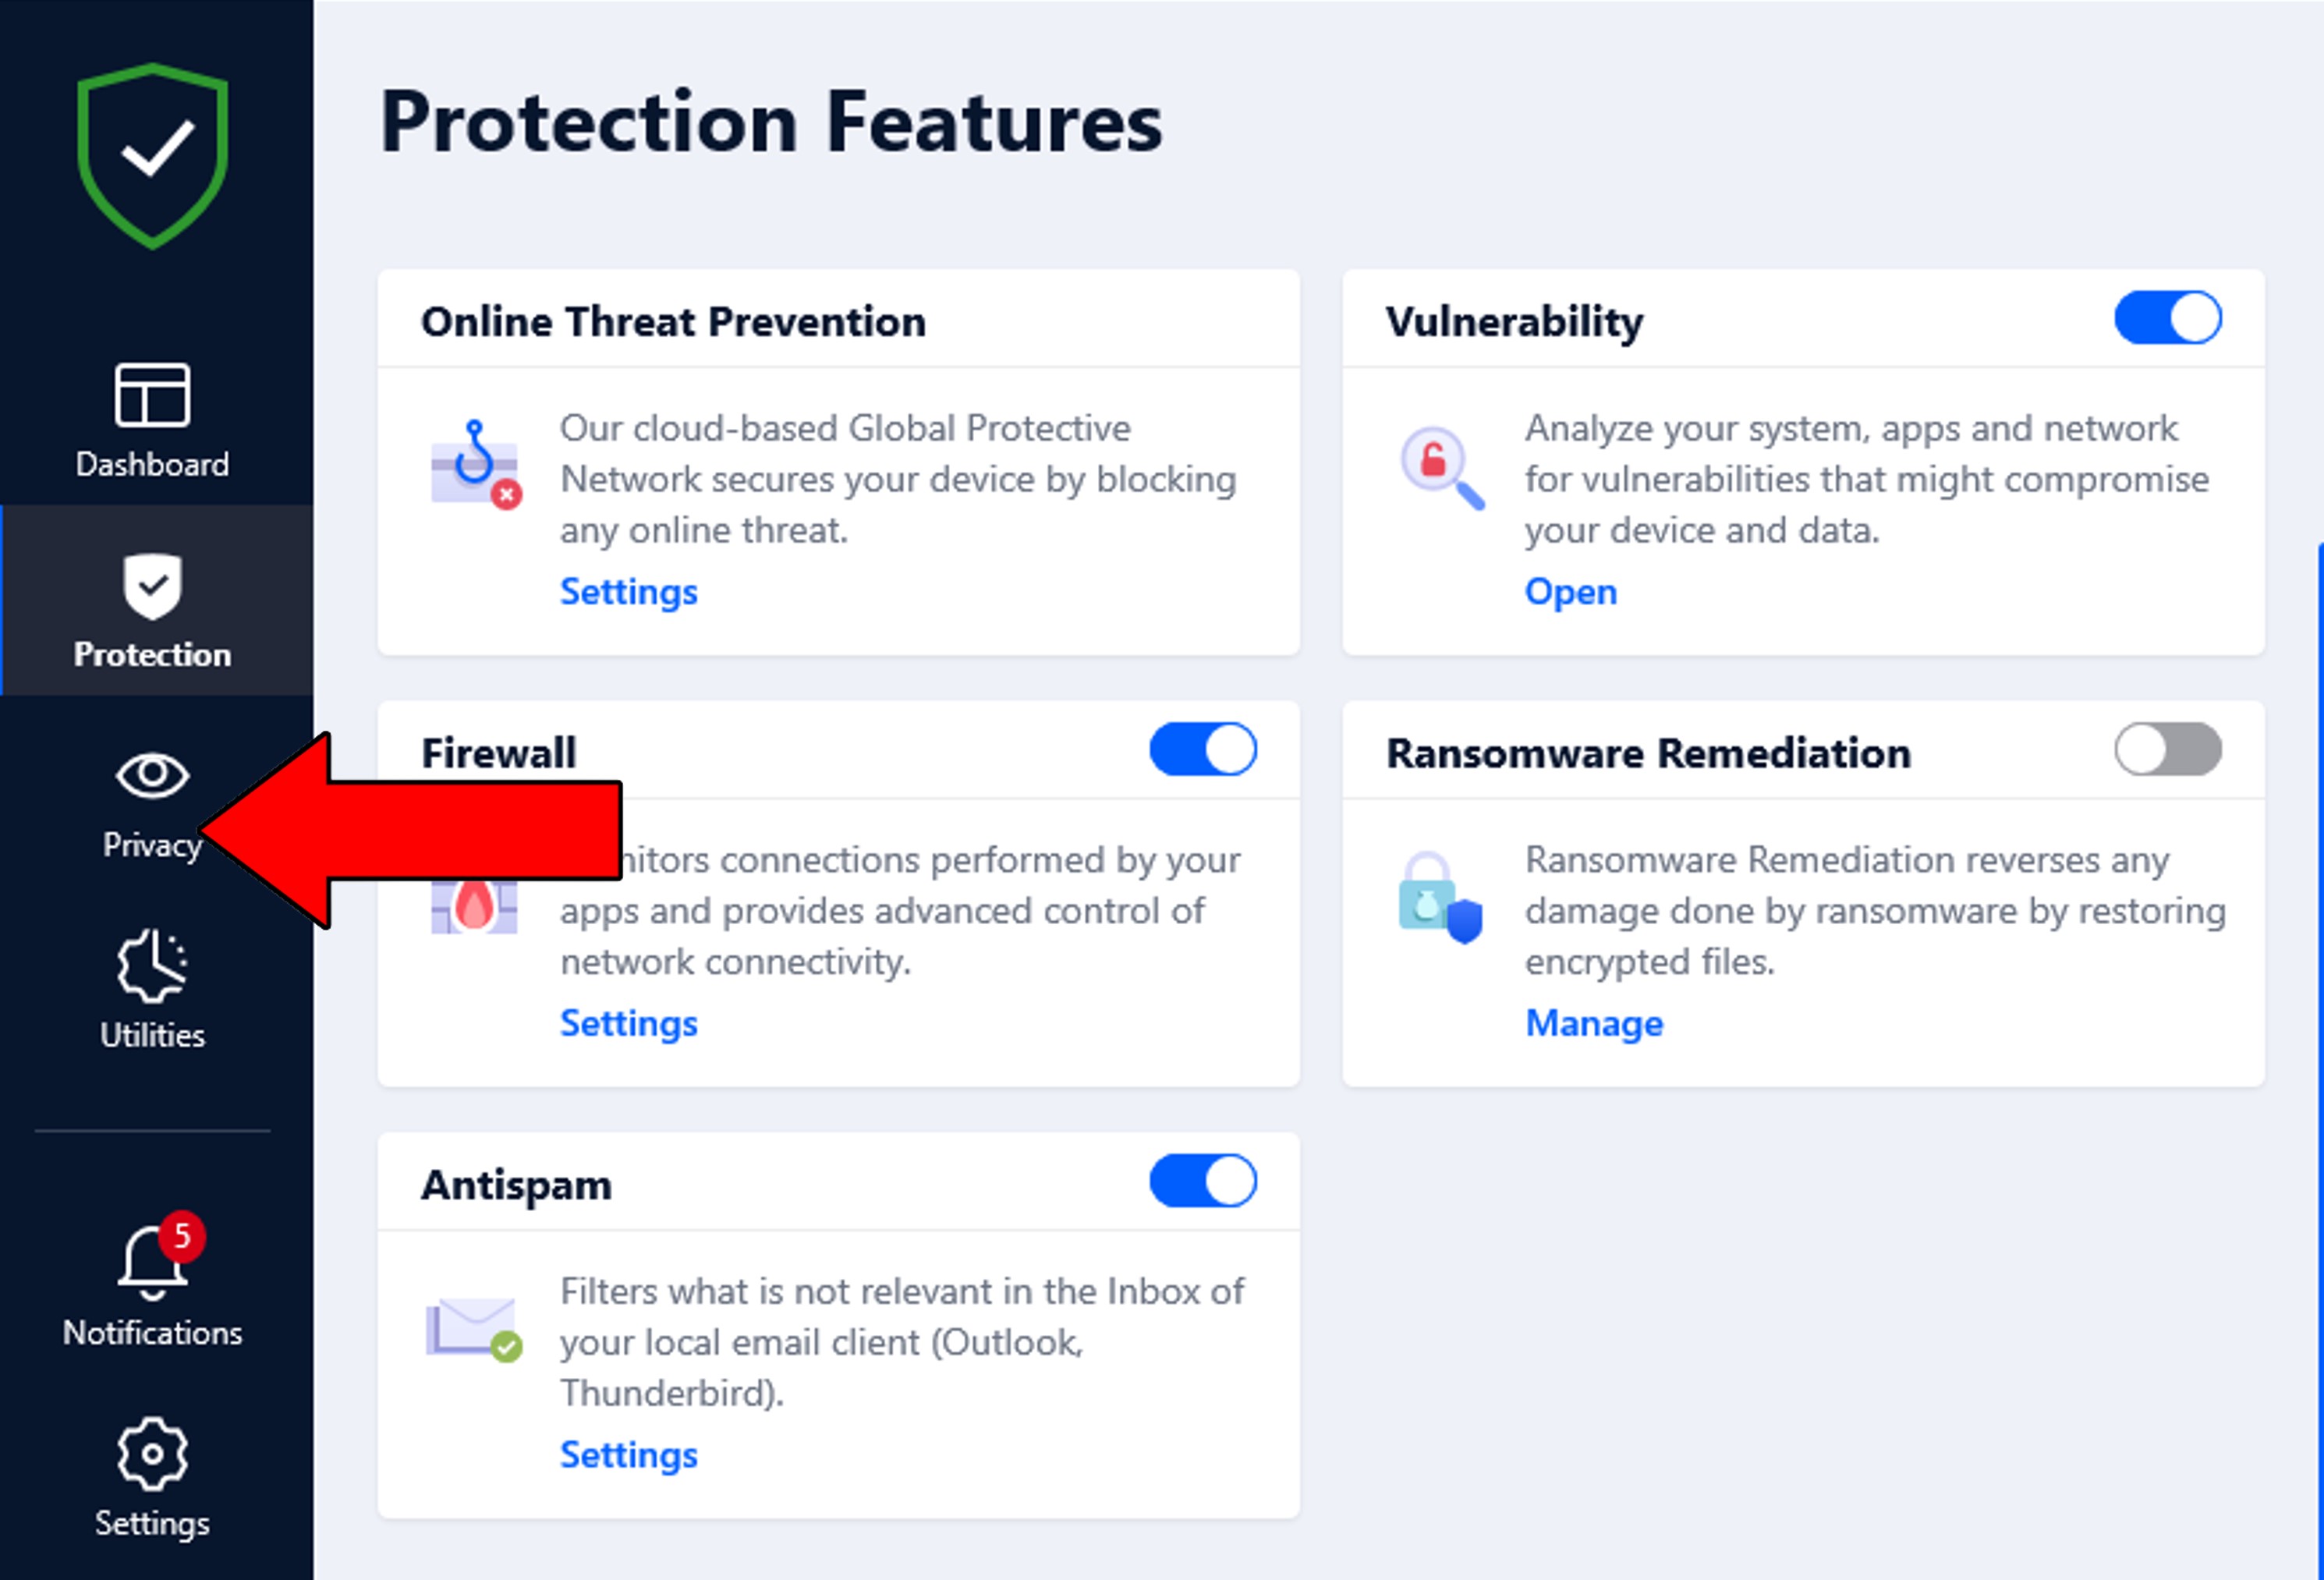 How to edit privacy settings on Bitdefender